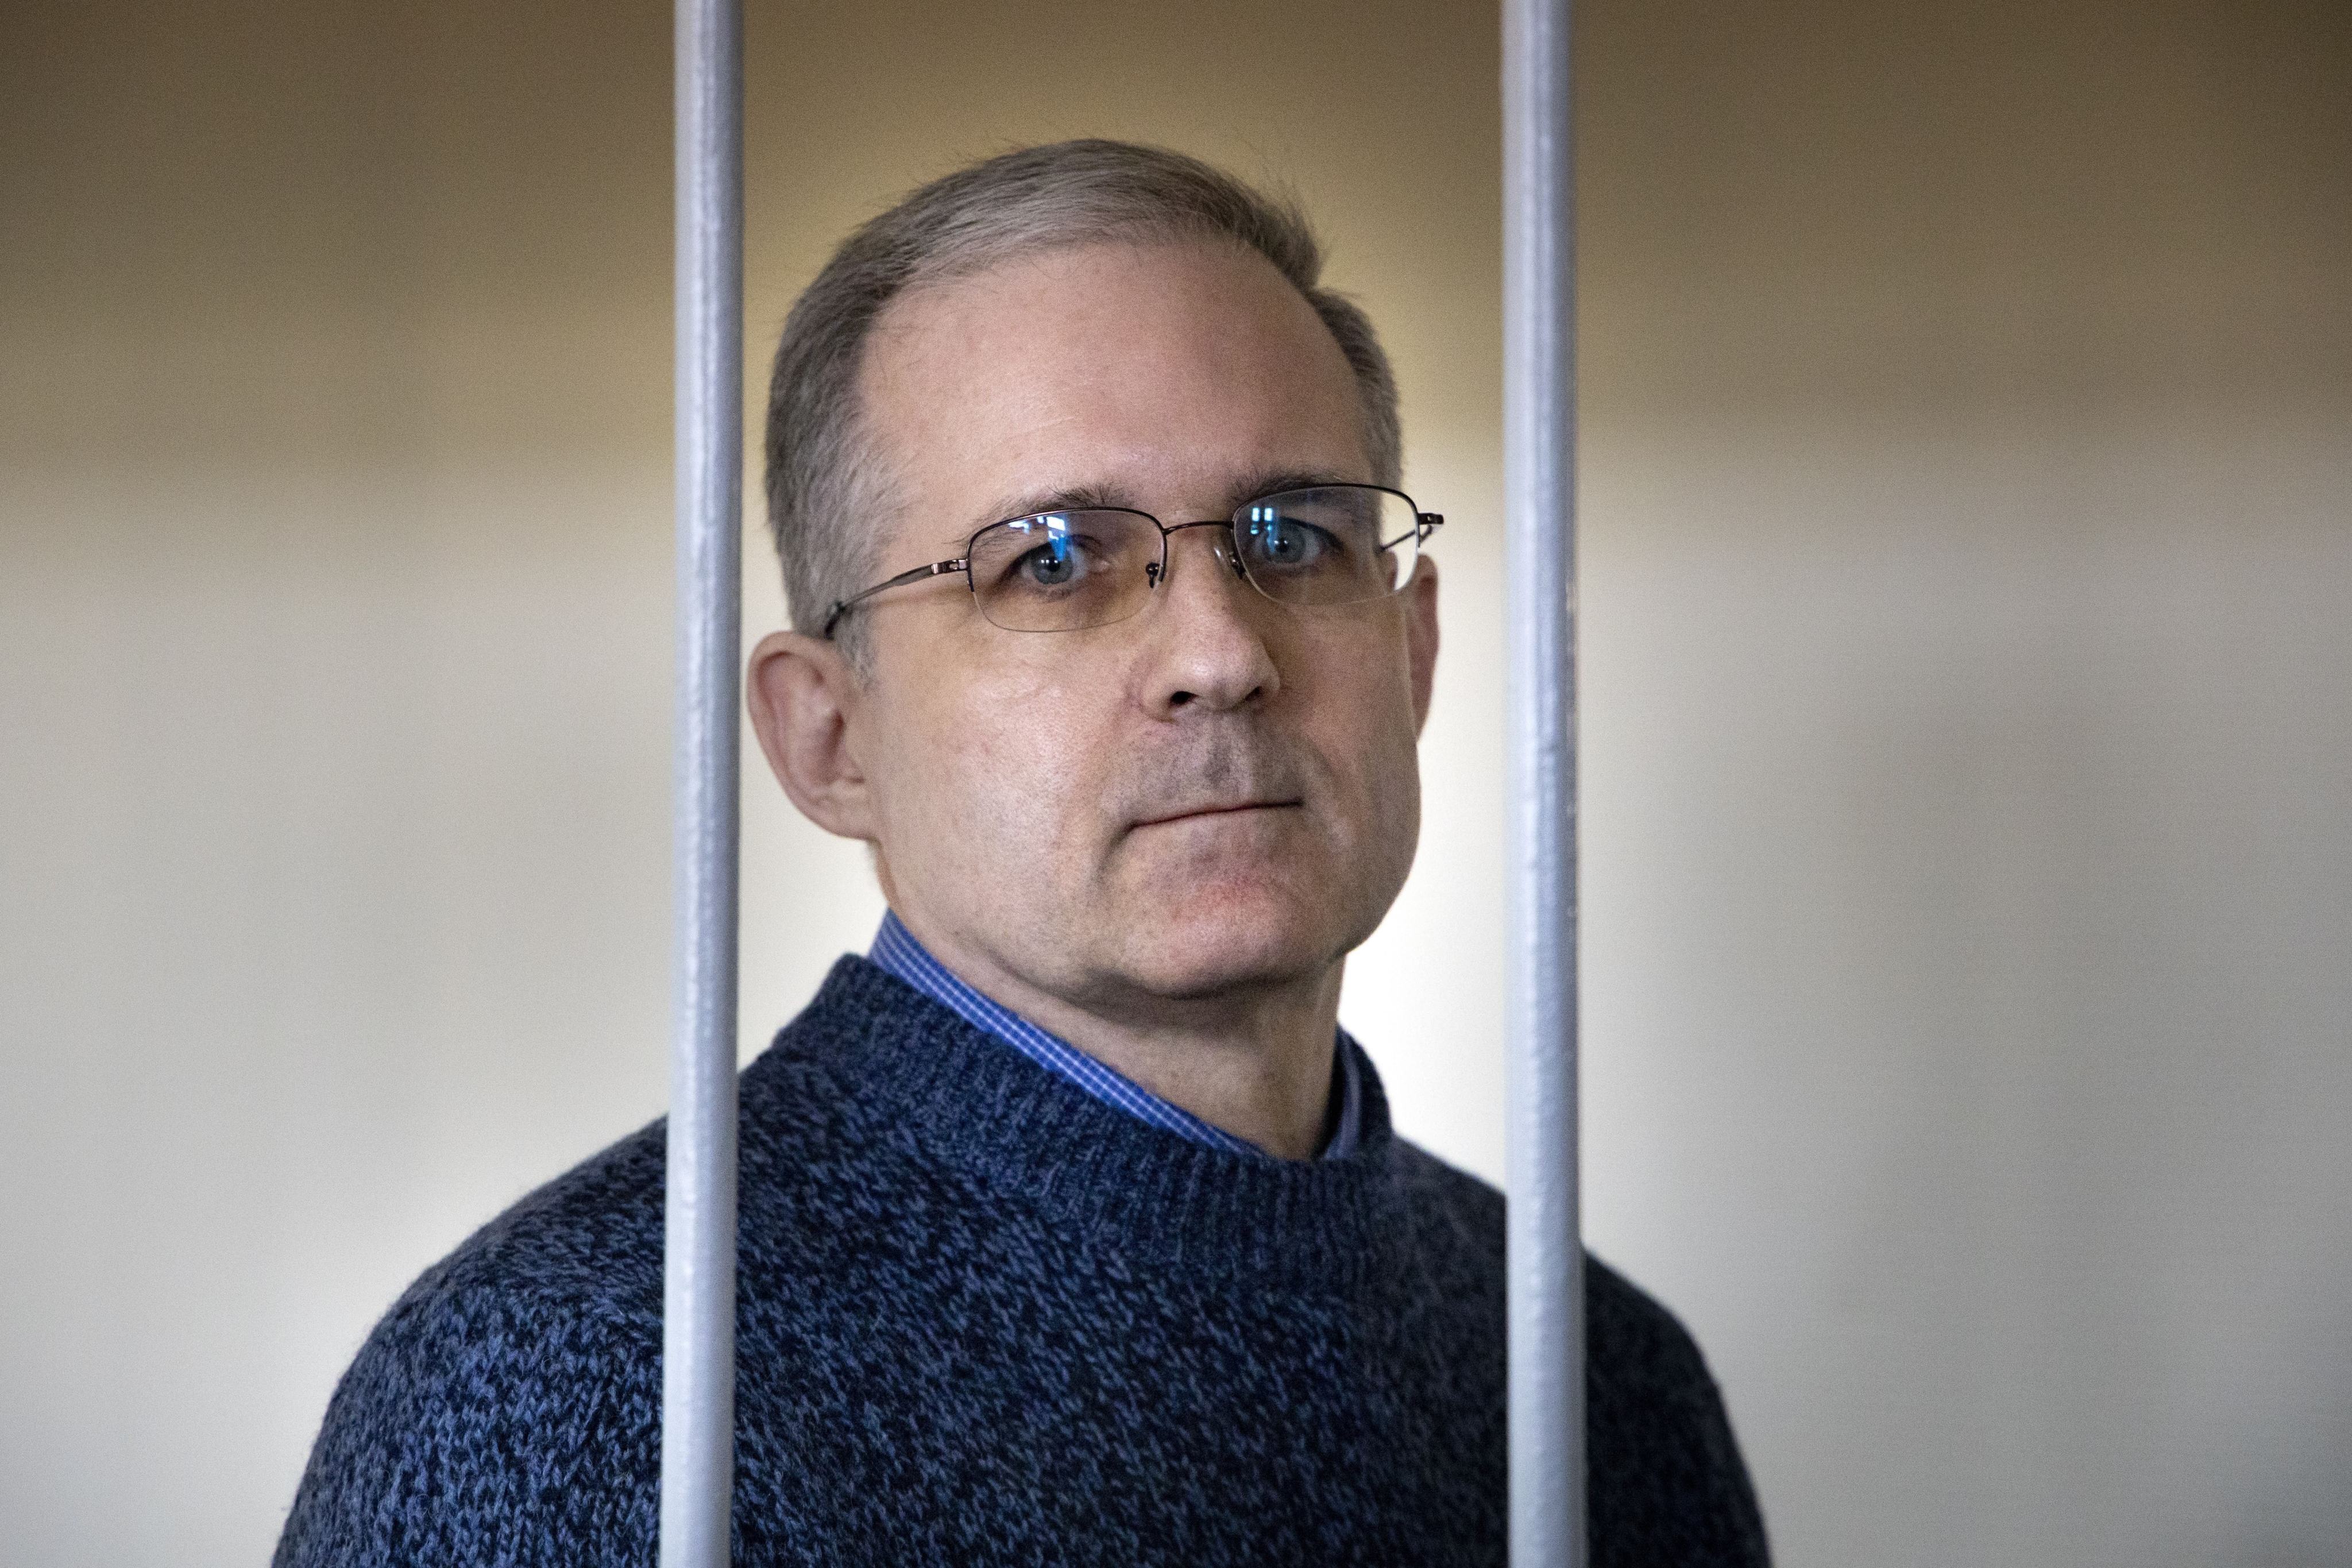 Paul Whelan, a former US Marine who was arrested for alleged spying in Moscow, standing in a defendant’s cage as he waits for a hearing in a courtroom in Moscow in August 2019. Photo: AP